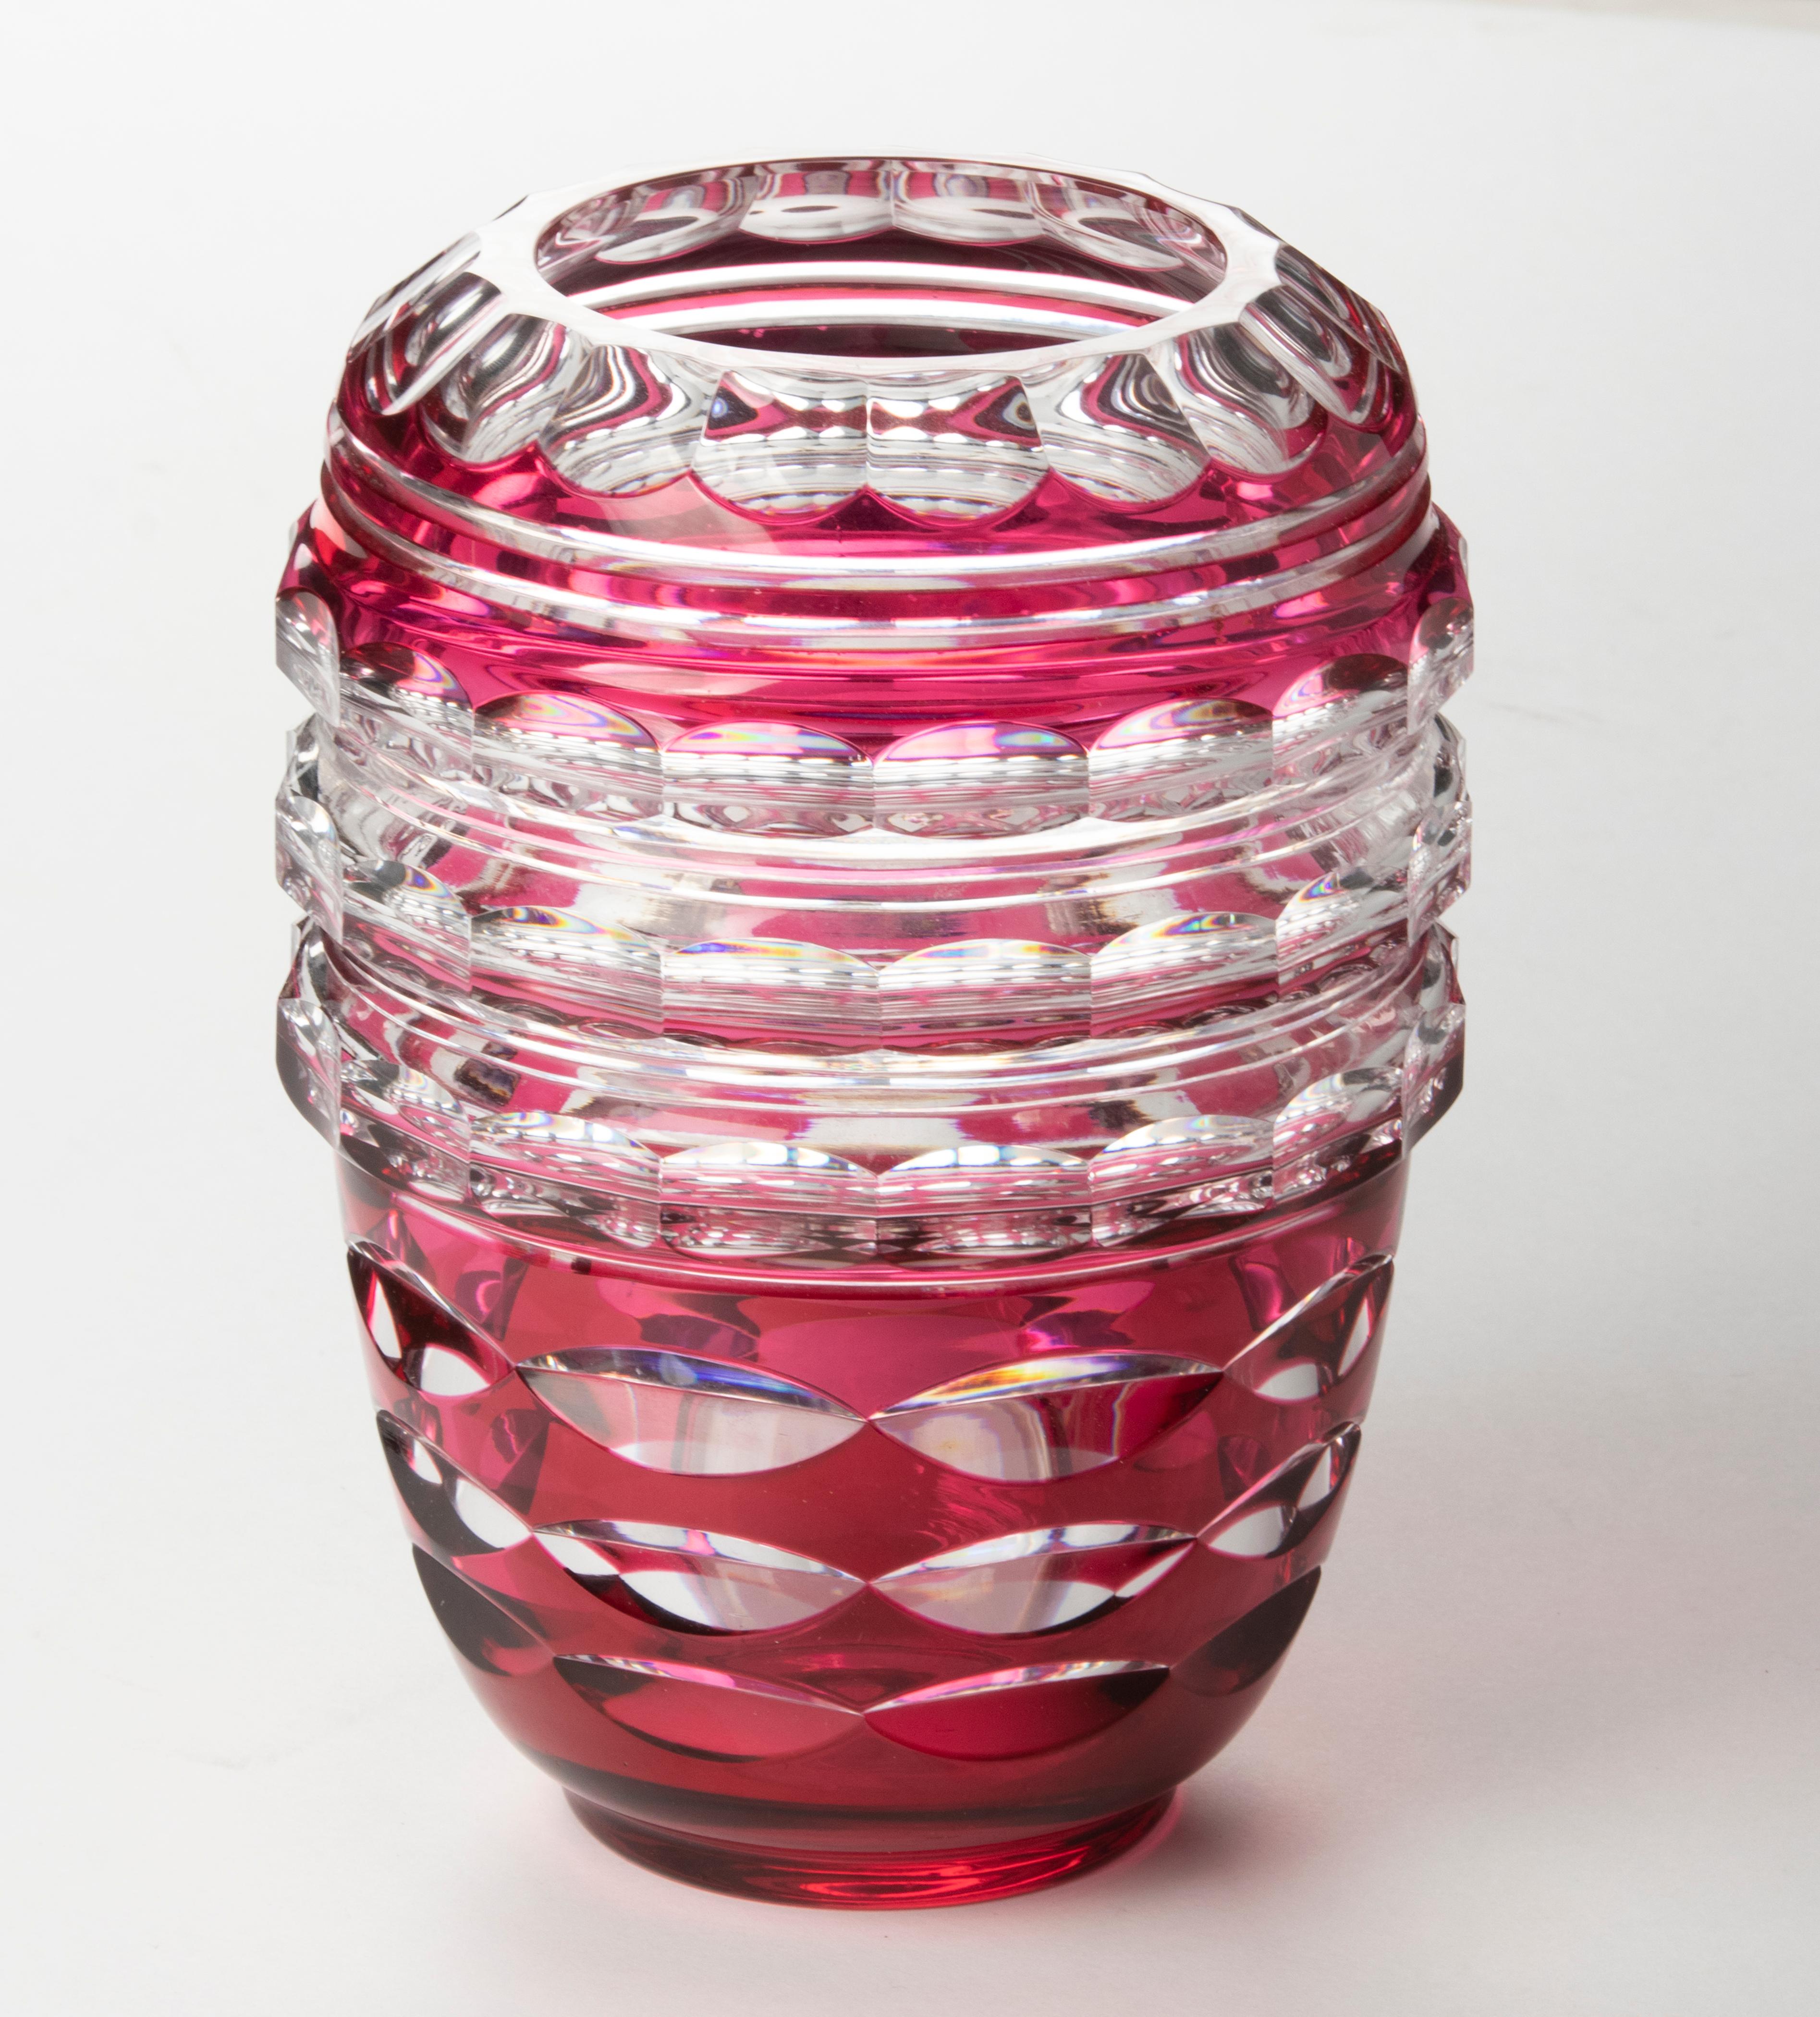 Crystal vase from the Belgian brand Val Saint Lambert. Beautiful color combination of red and clear crystal, with beautiful cut. The vase is not marked (pieces from this period by VSL are rarely marked). It is a well-known model by Val Saint